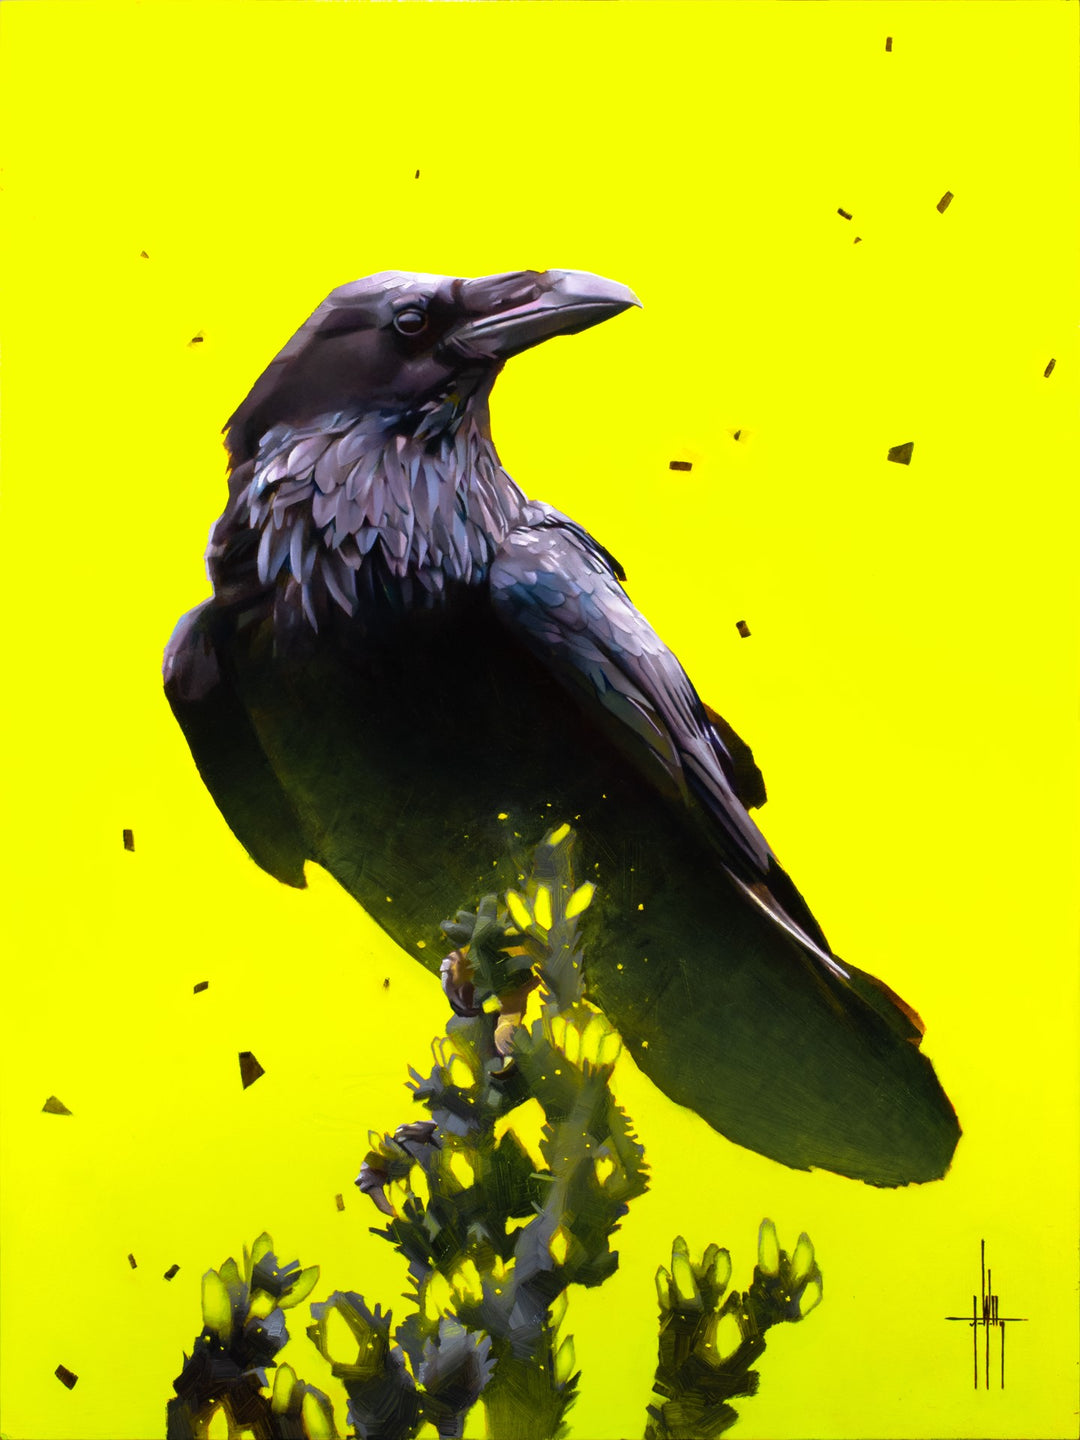 An artistically rendered "Toxic" black crow against a vibrant yellow background by Jess Wathen.